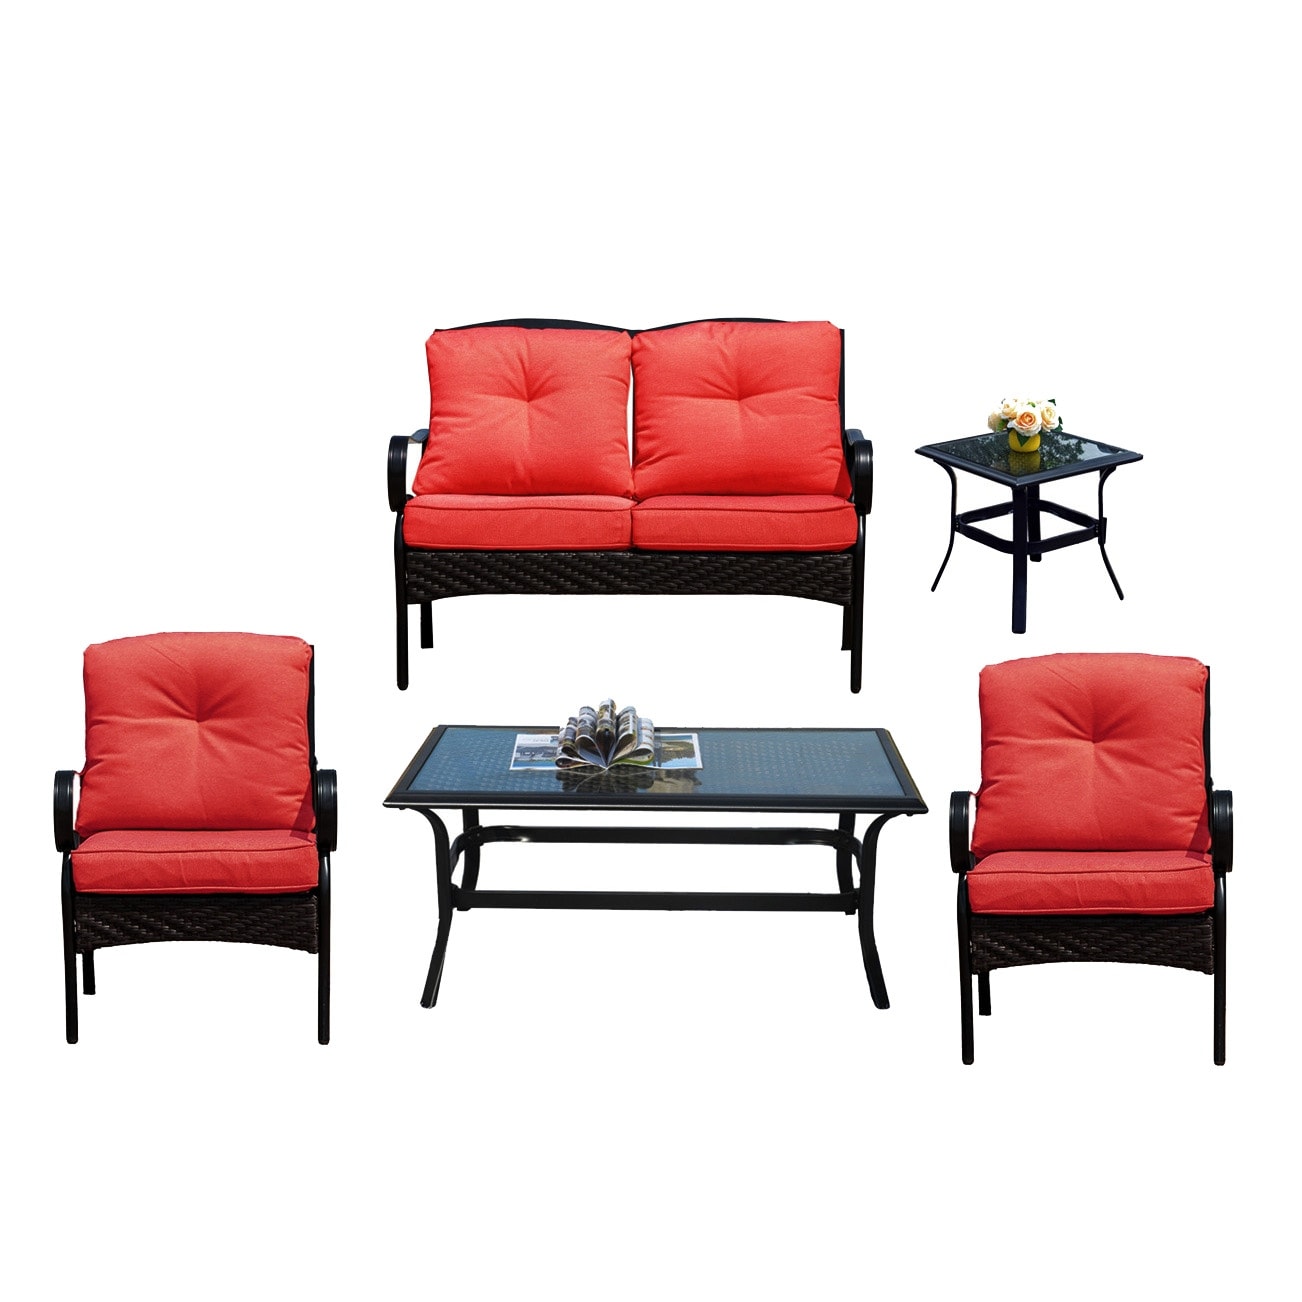 Patio Iron 4 Or 5 Piece Sofa Seating Group With Cushions